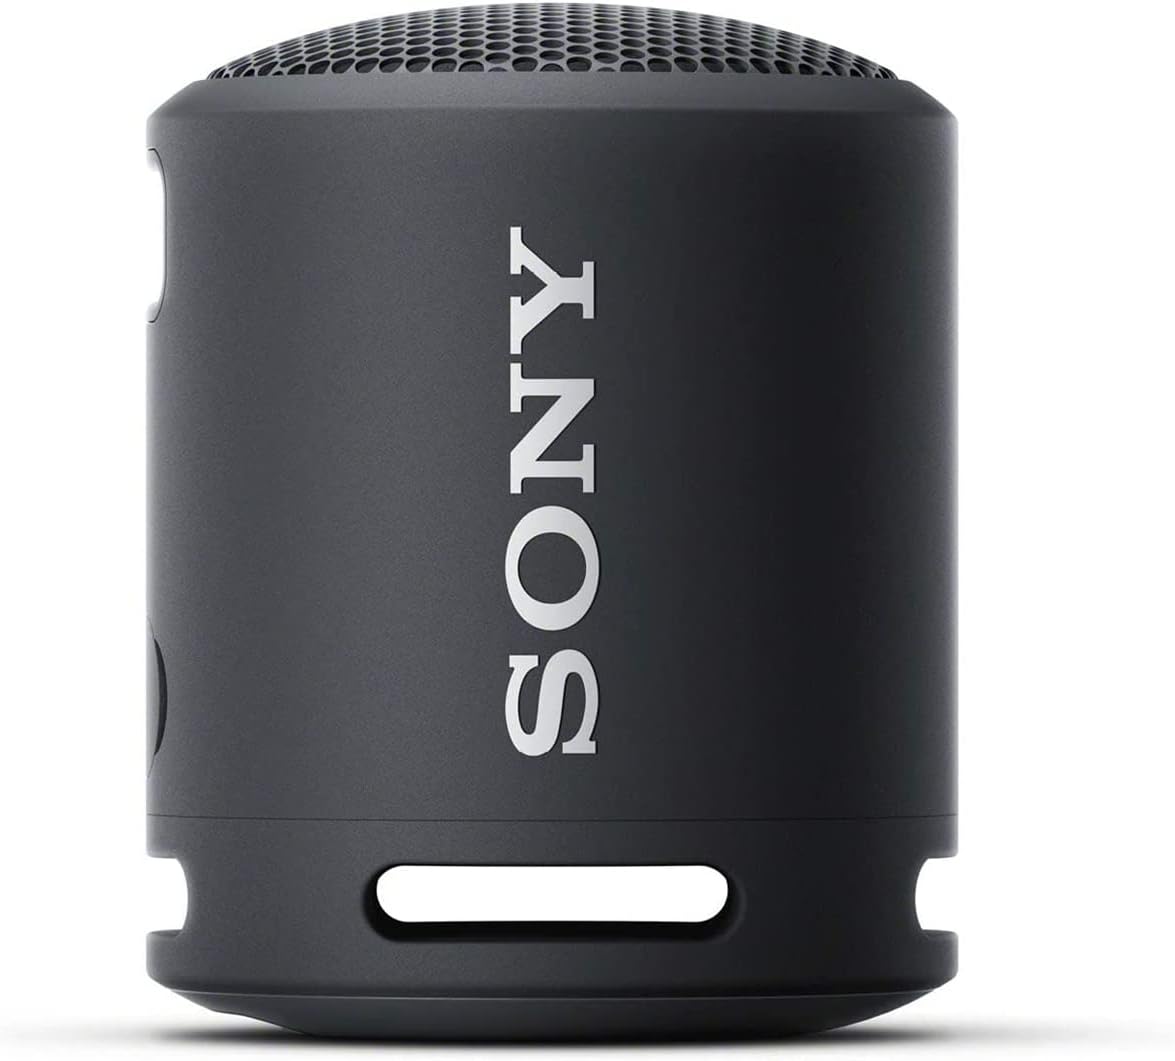 Remarks on Sony SRS-XB13 EXTRA BASS Wireless Bluetooth Portable Lightweight Compact Travel Speaker, Black